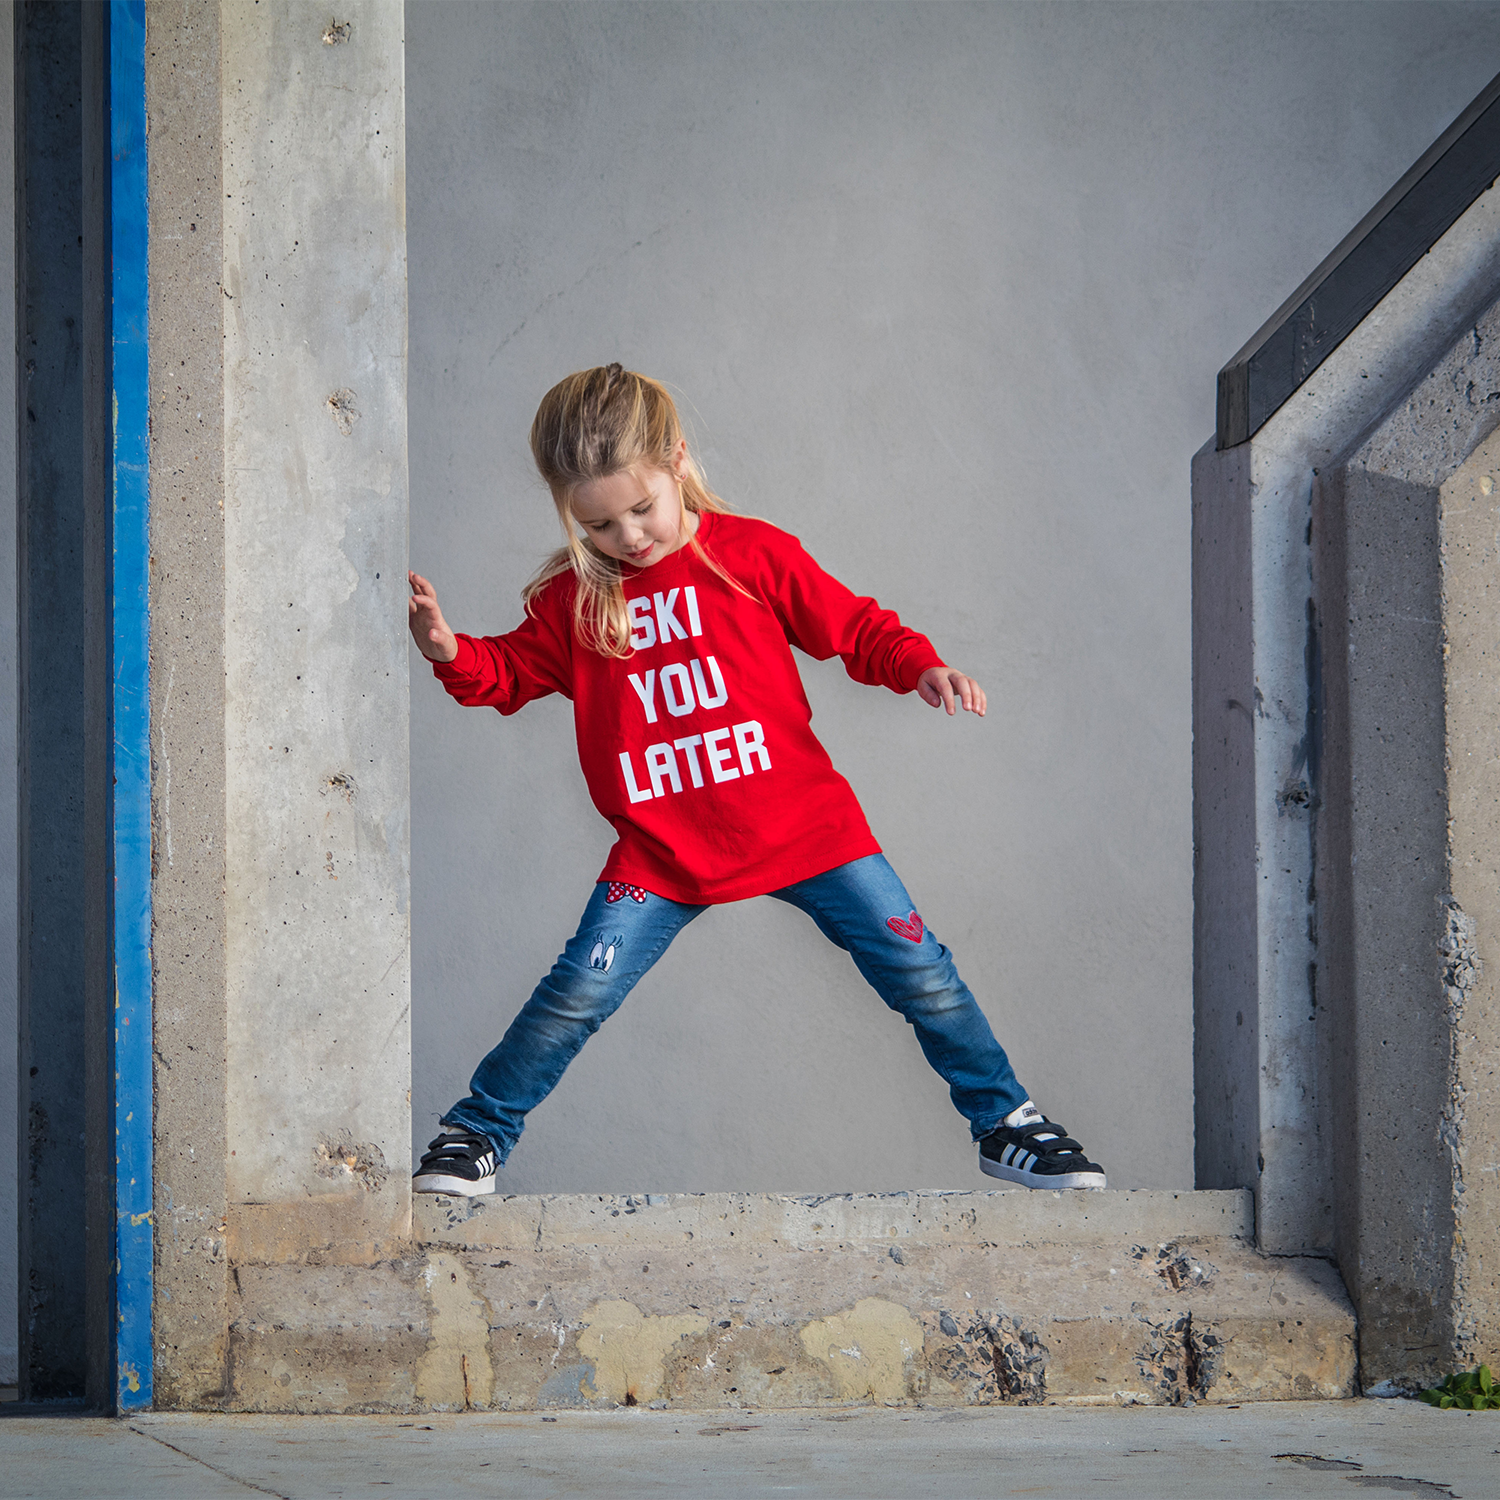 Blonde girl with red shirt with 'Ski you later' print by KMLeon standing on concrete.